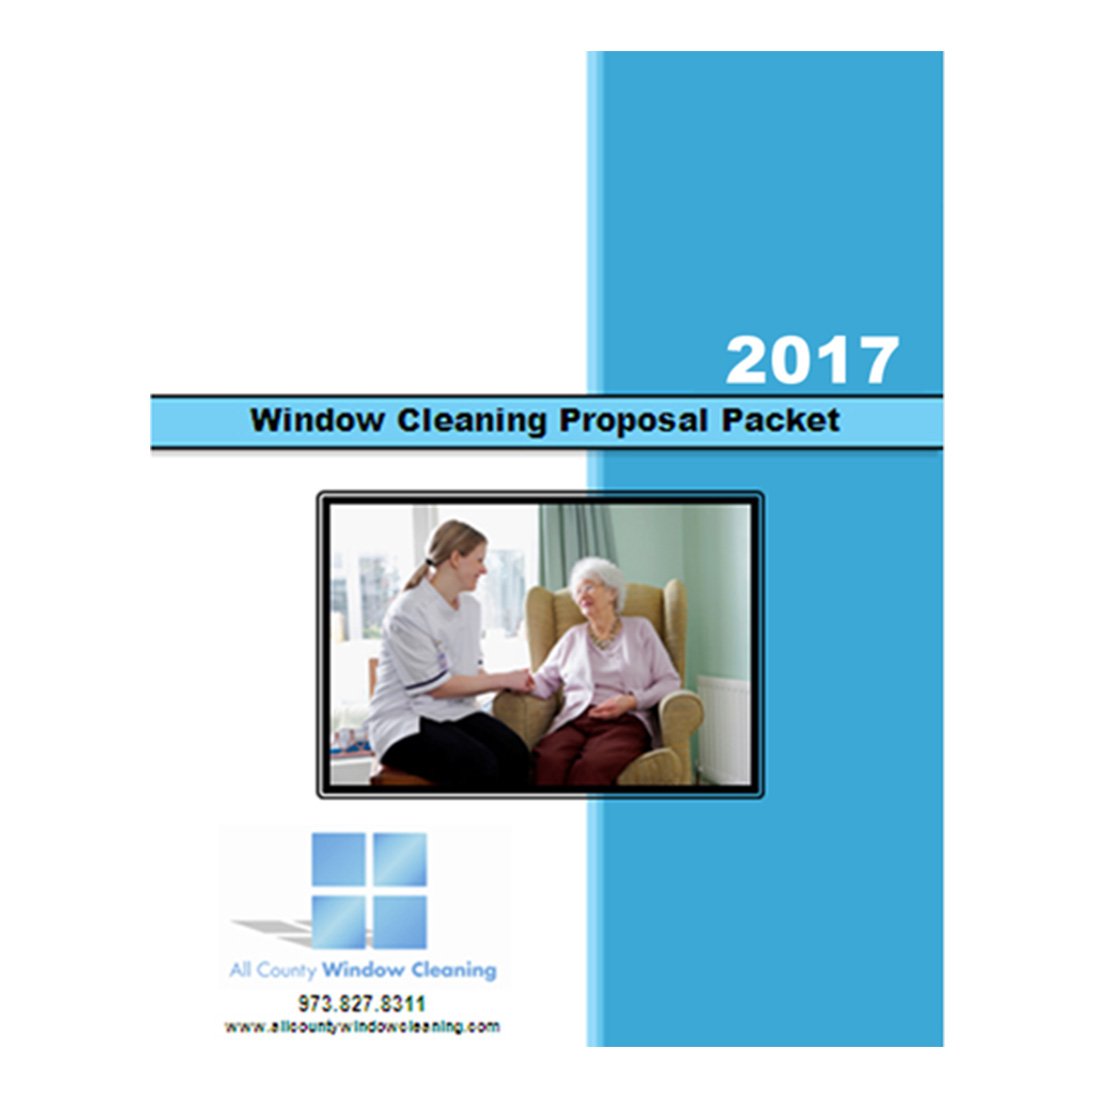 Hospital Proposal - Window Cleaning Proposal Packet - Front View